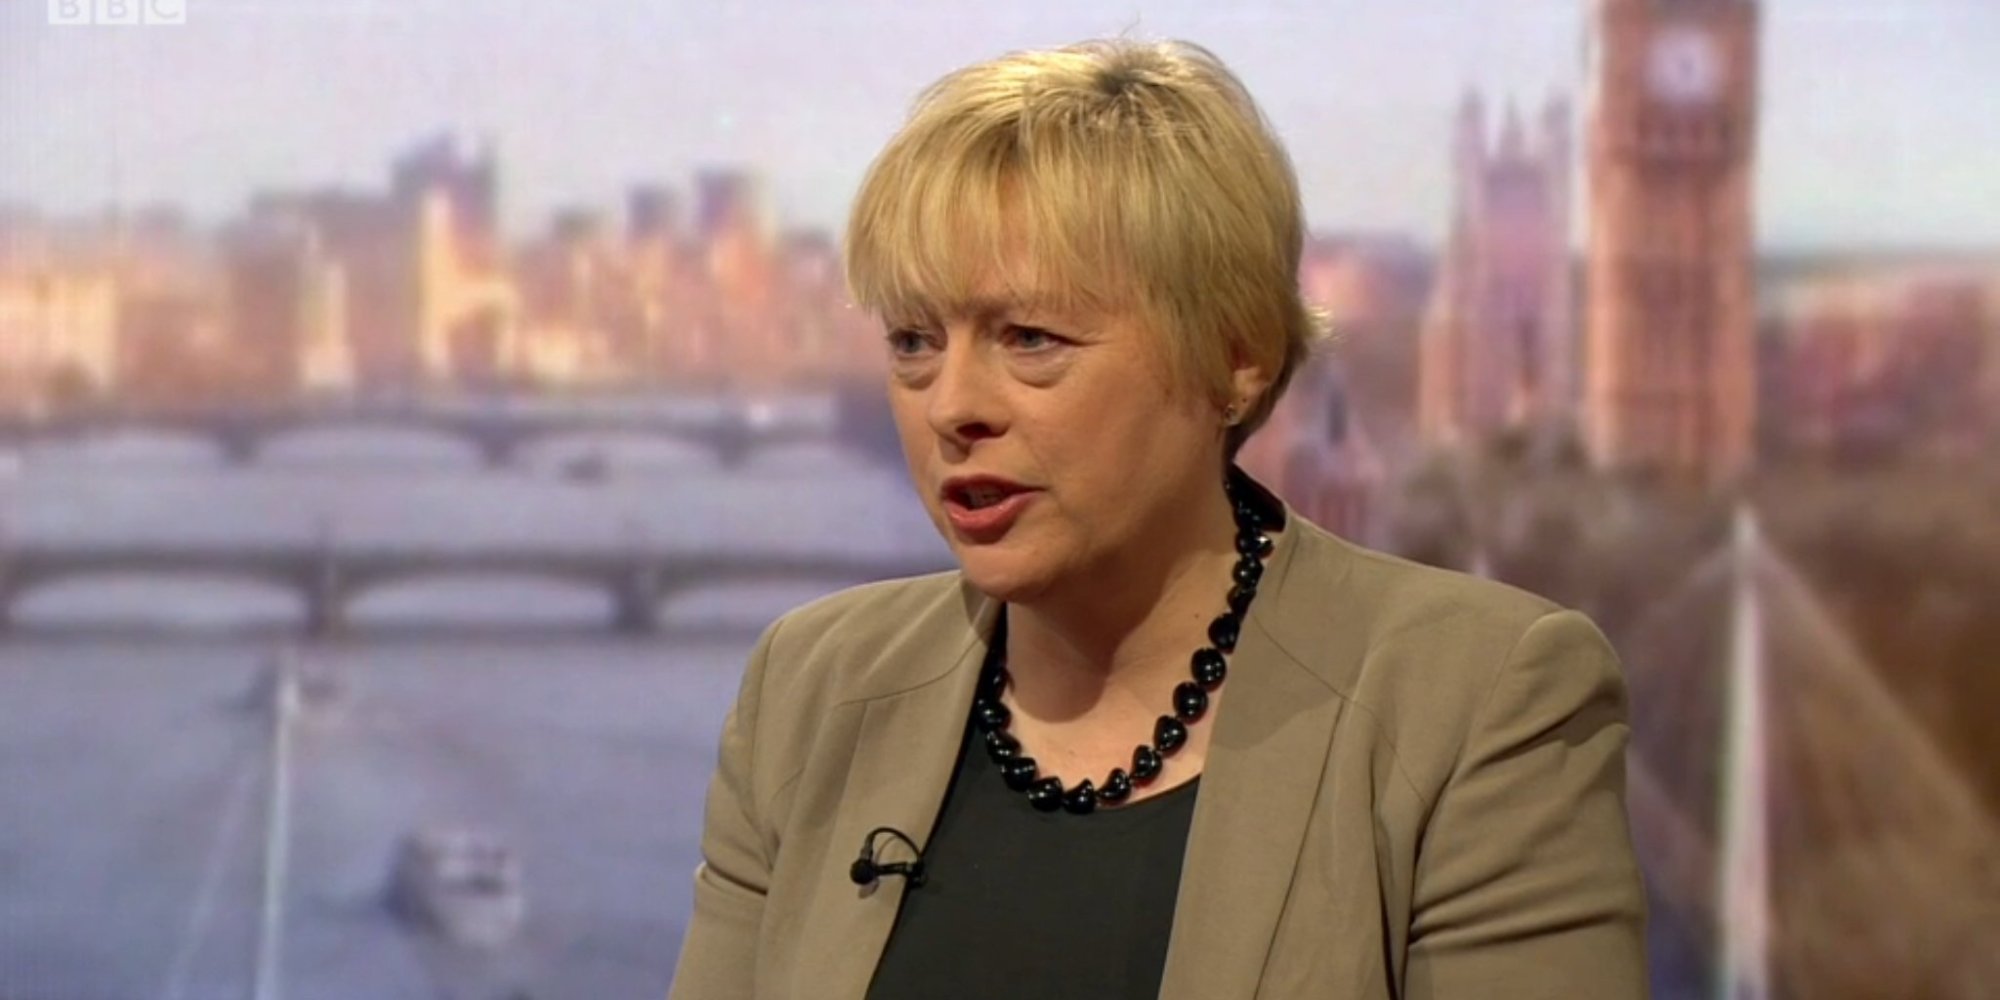 Angela Eagle, formerly the shadow business secretary, may emerge as Corbyn's challenger. (Facebook)